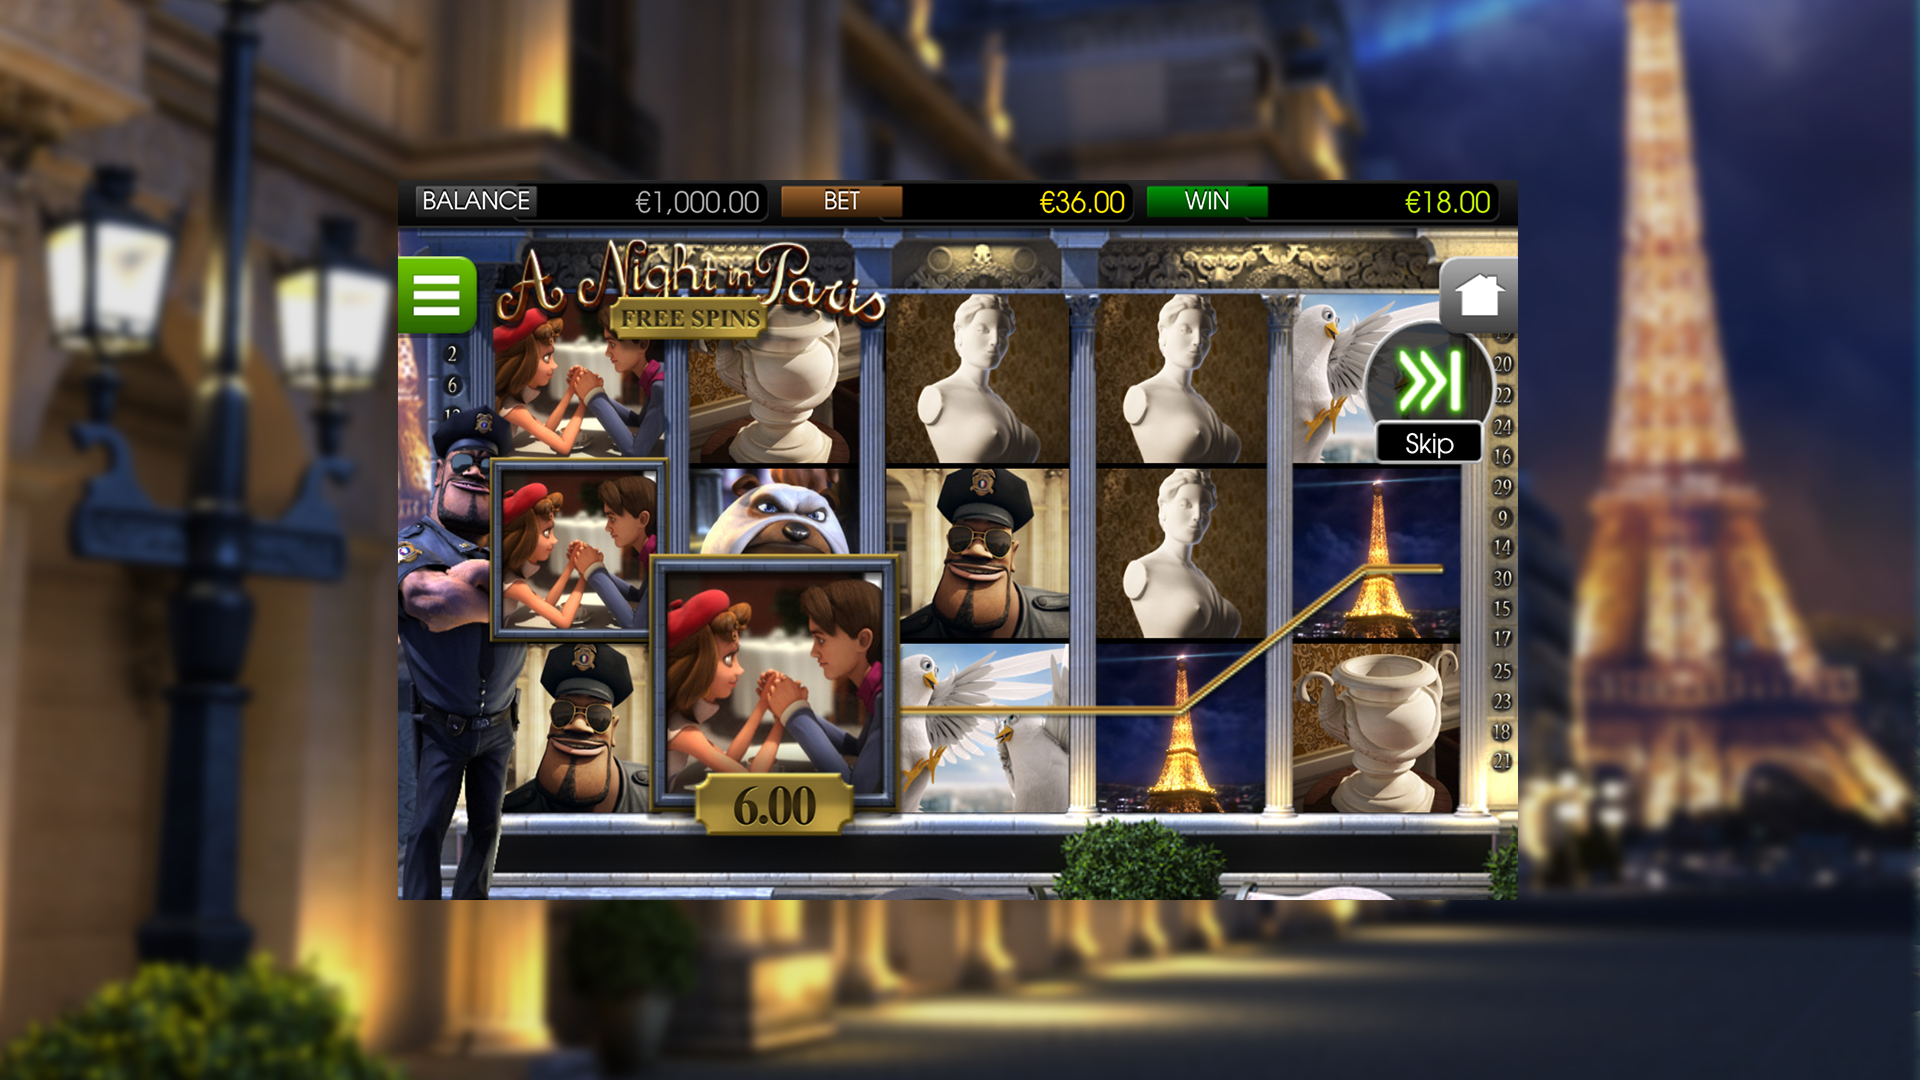 A Night In Paris - Free Spins